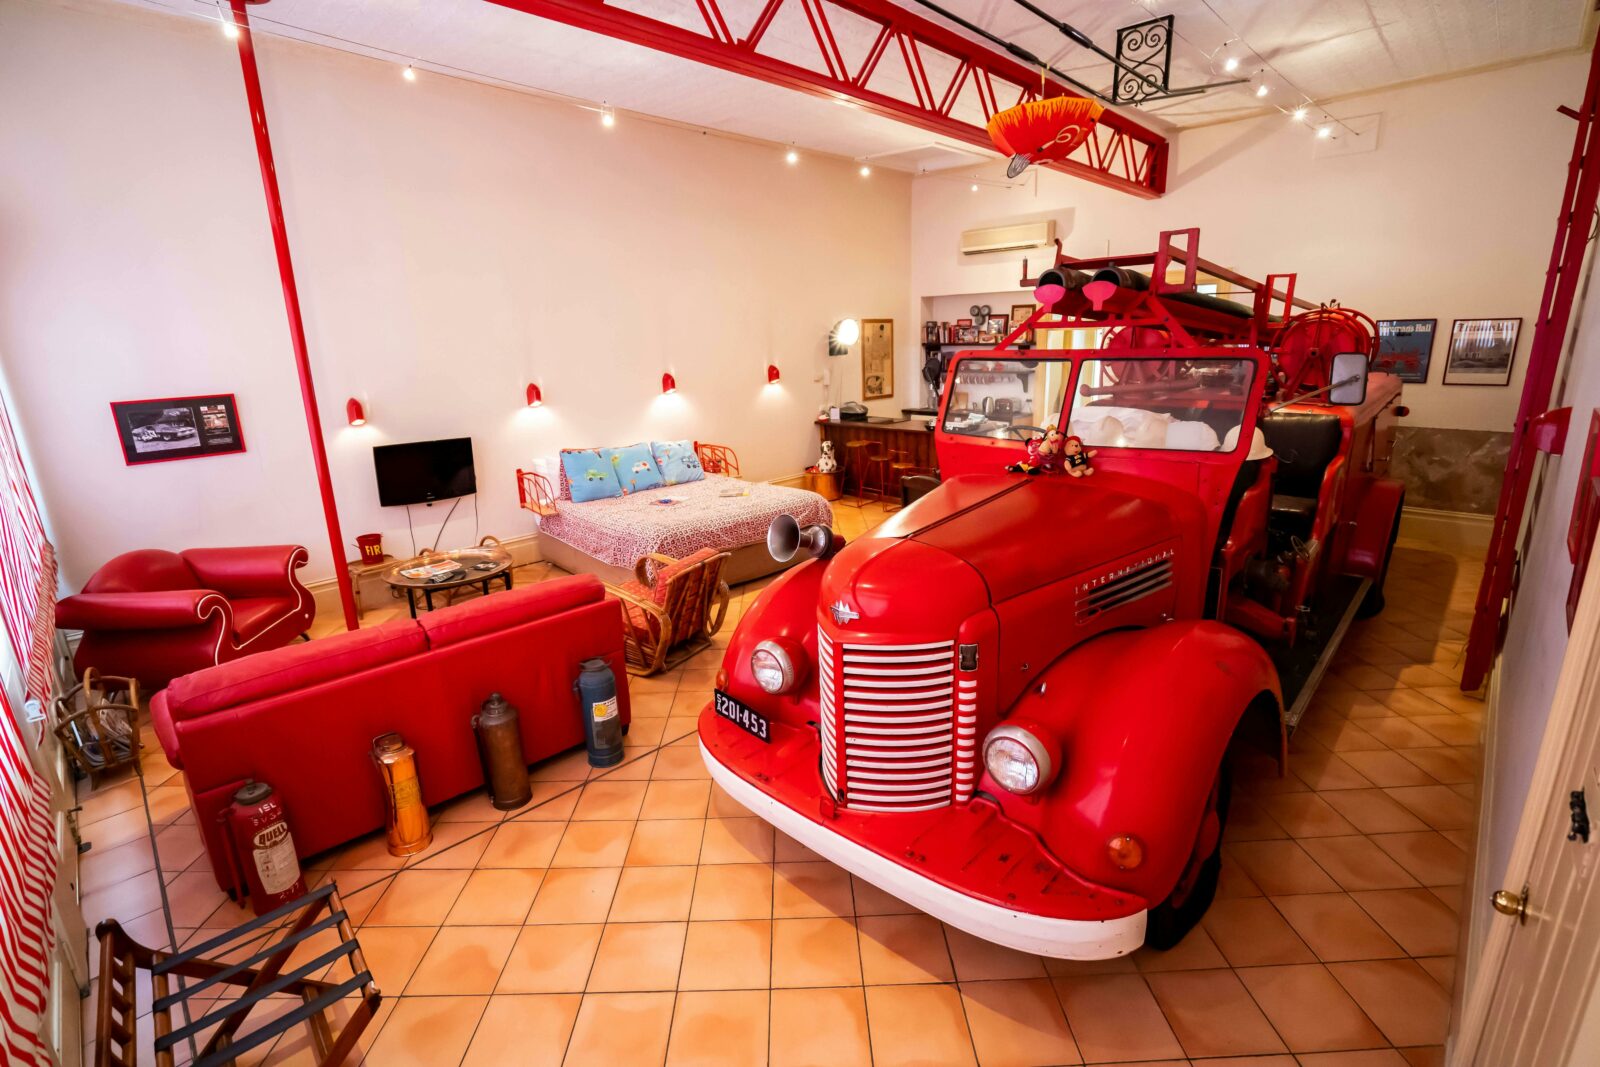 Indulge in the world-famous unique Fire Engine Suite, with its 1942 International Fire-truck